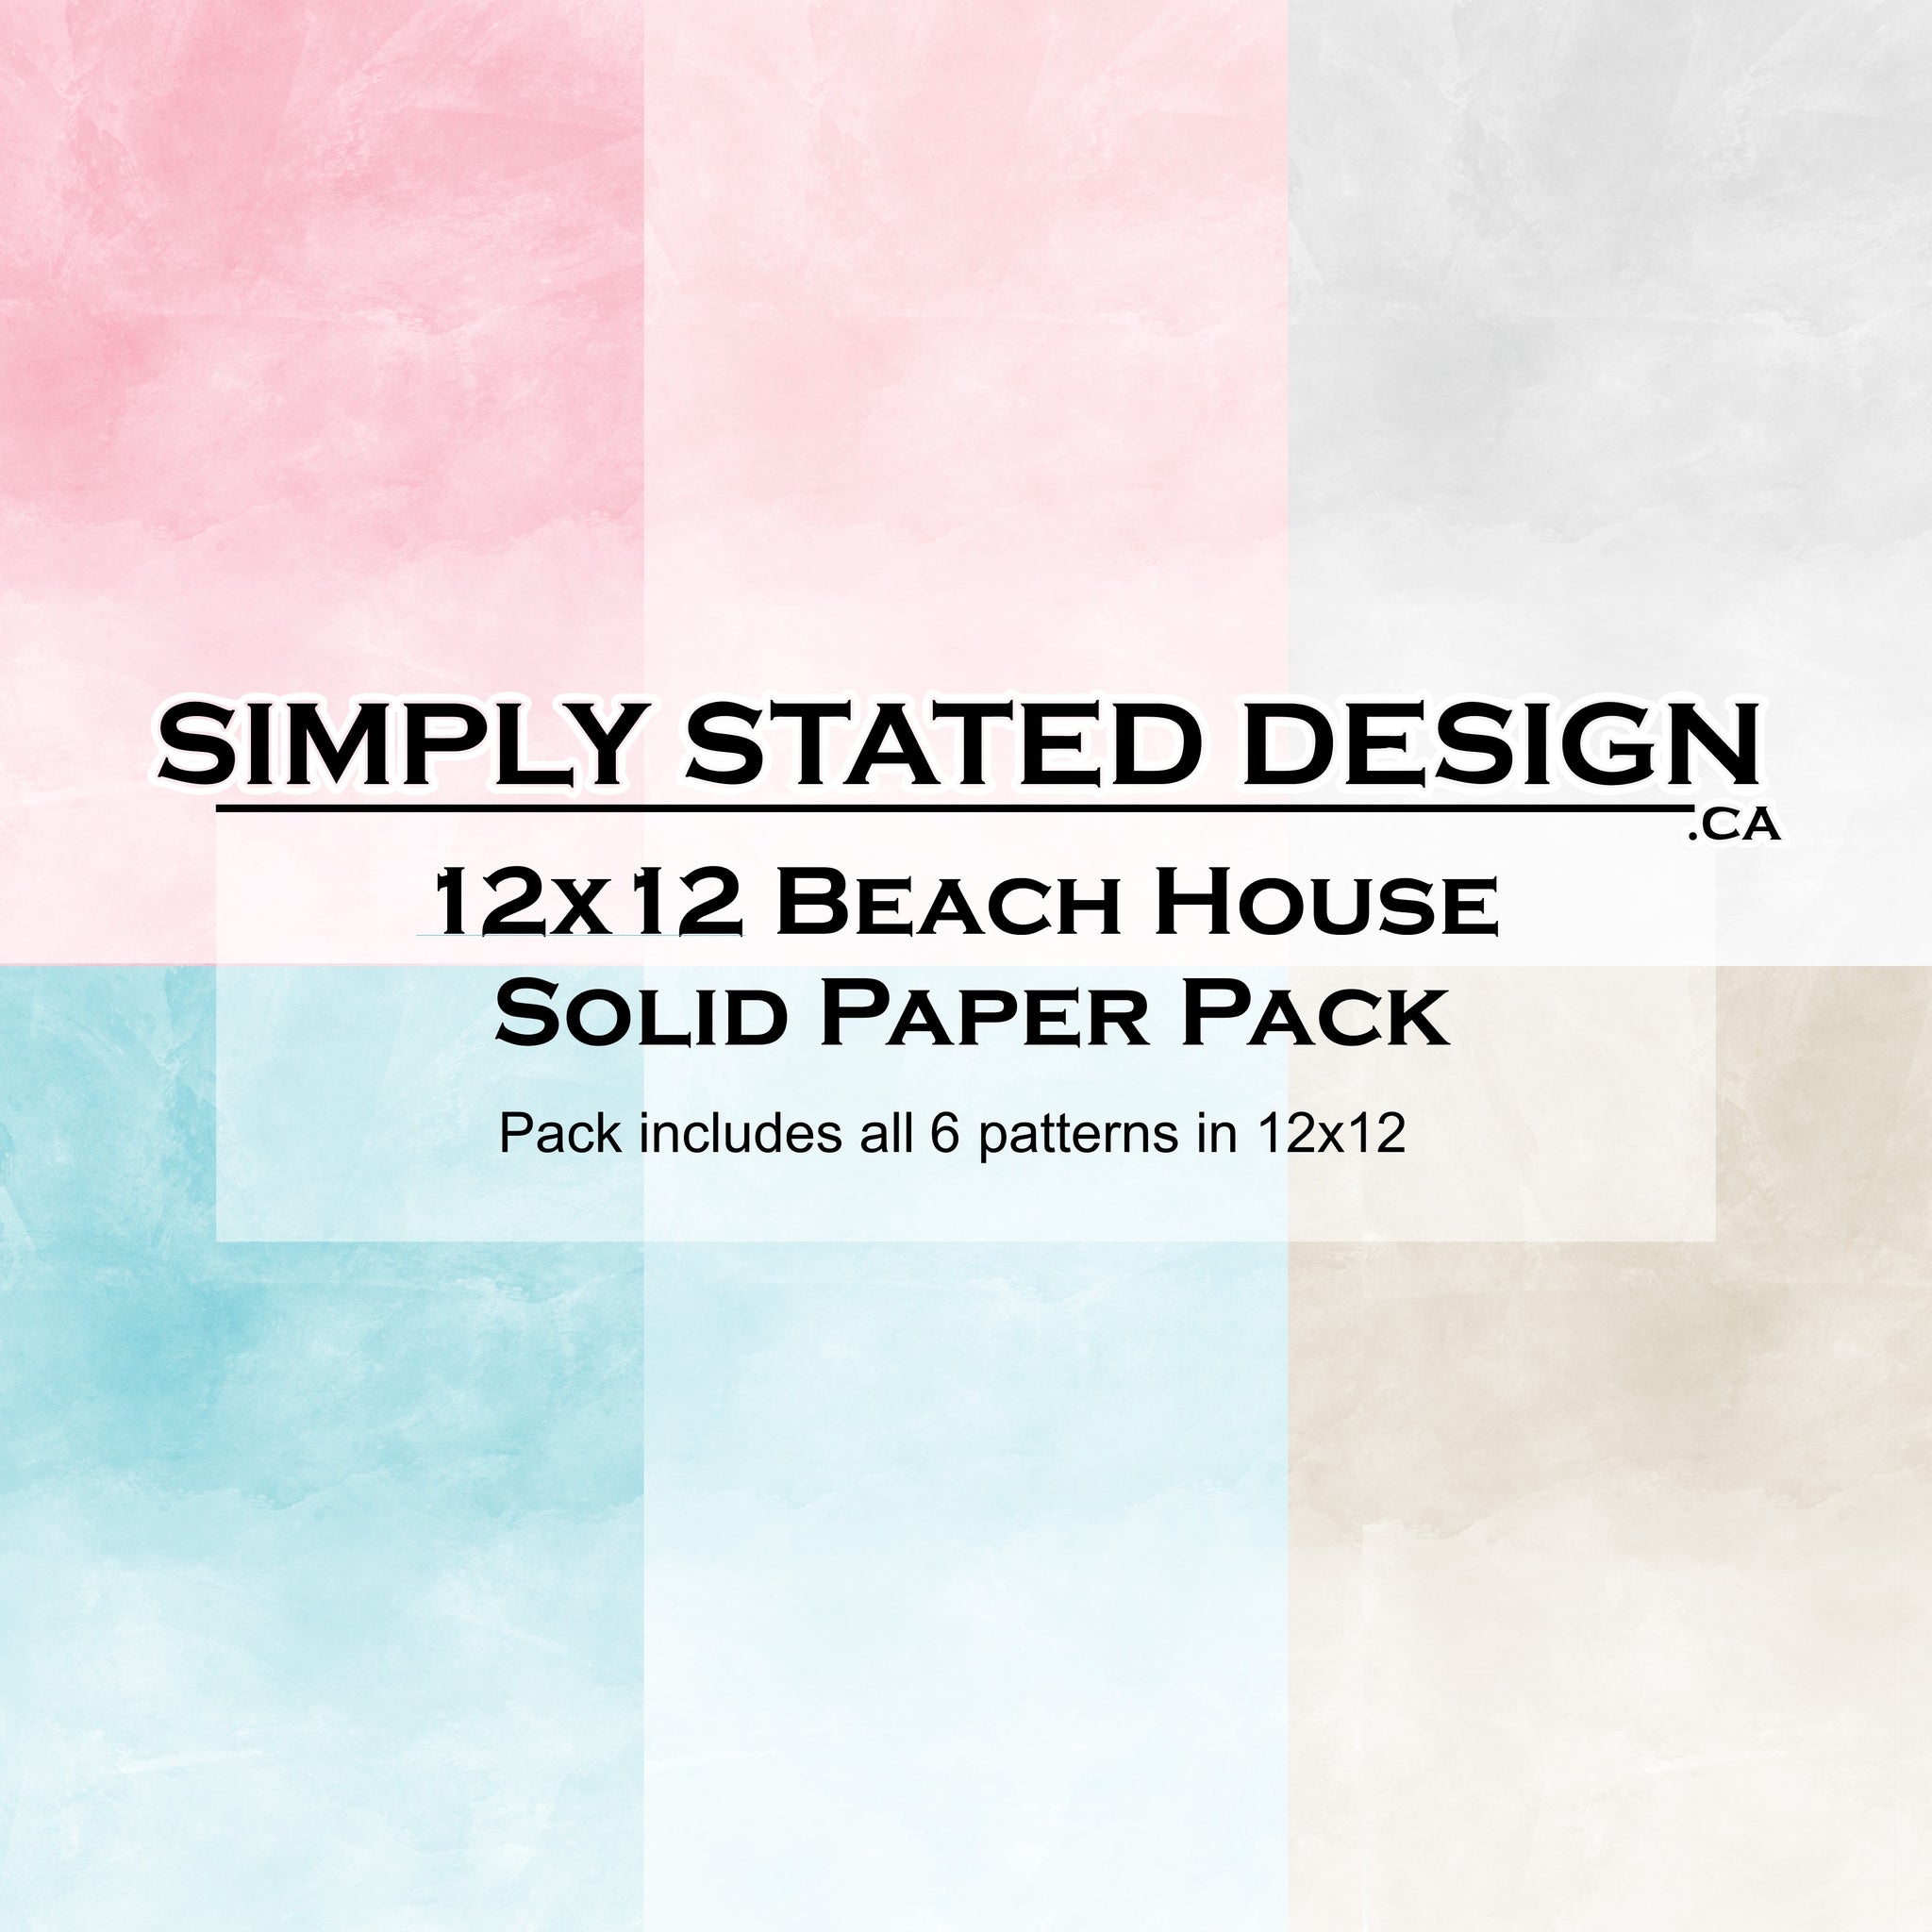 June "Beach House" 12x12 Solid Paper Pack